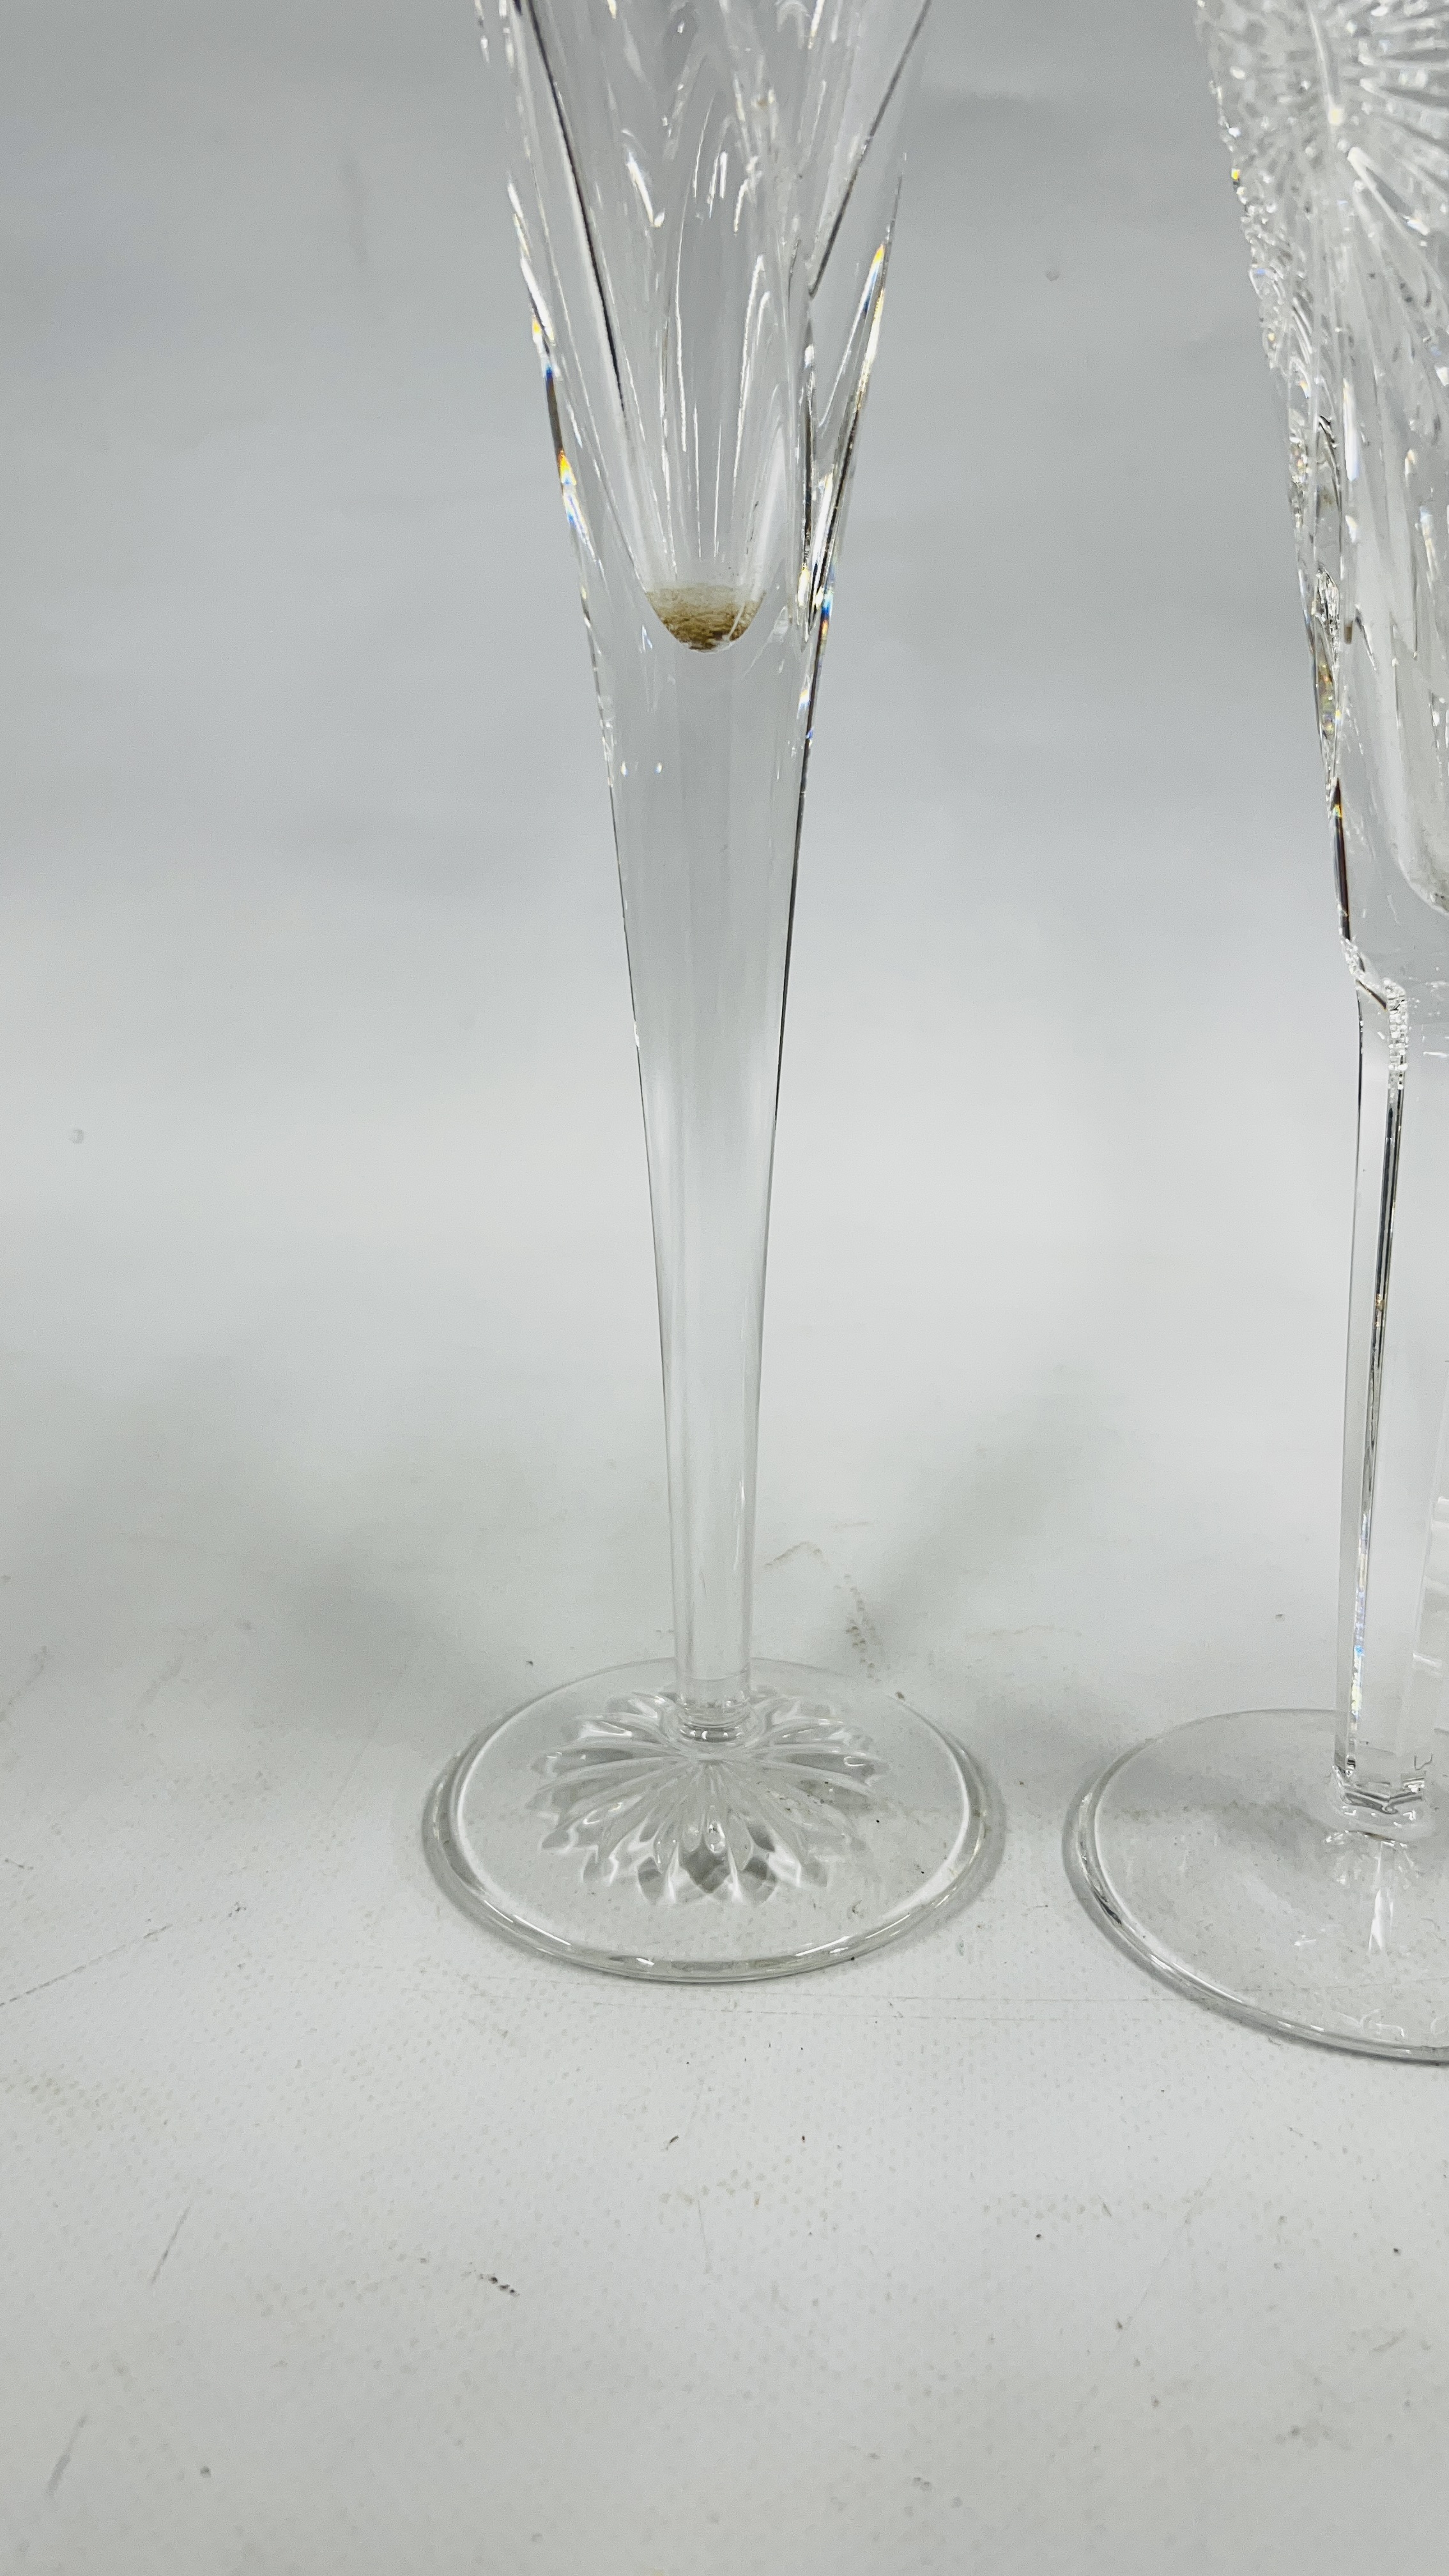 A PAIR OF WATERFORD MILLENIUM FLUTES ALONG WITH A FURTHER WATERFORD CRYSTAL FLUTE - Image 7 of 8